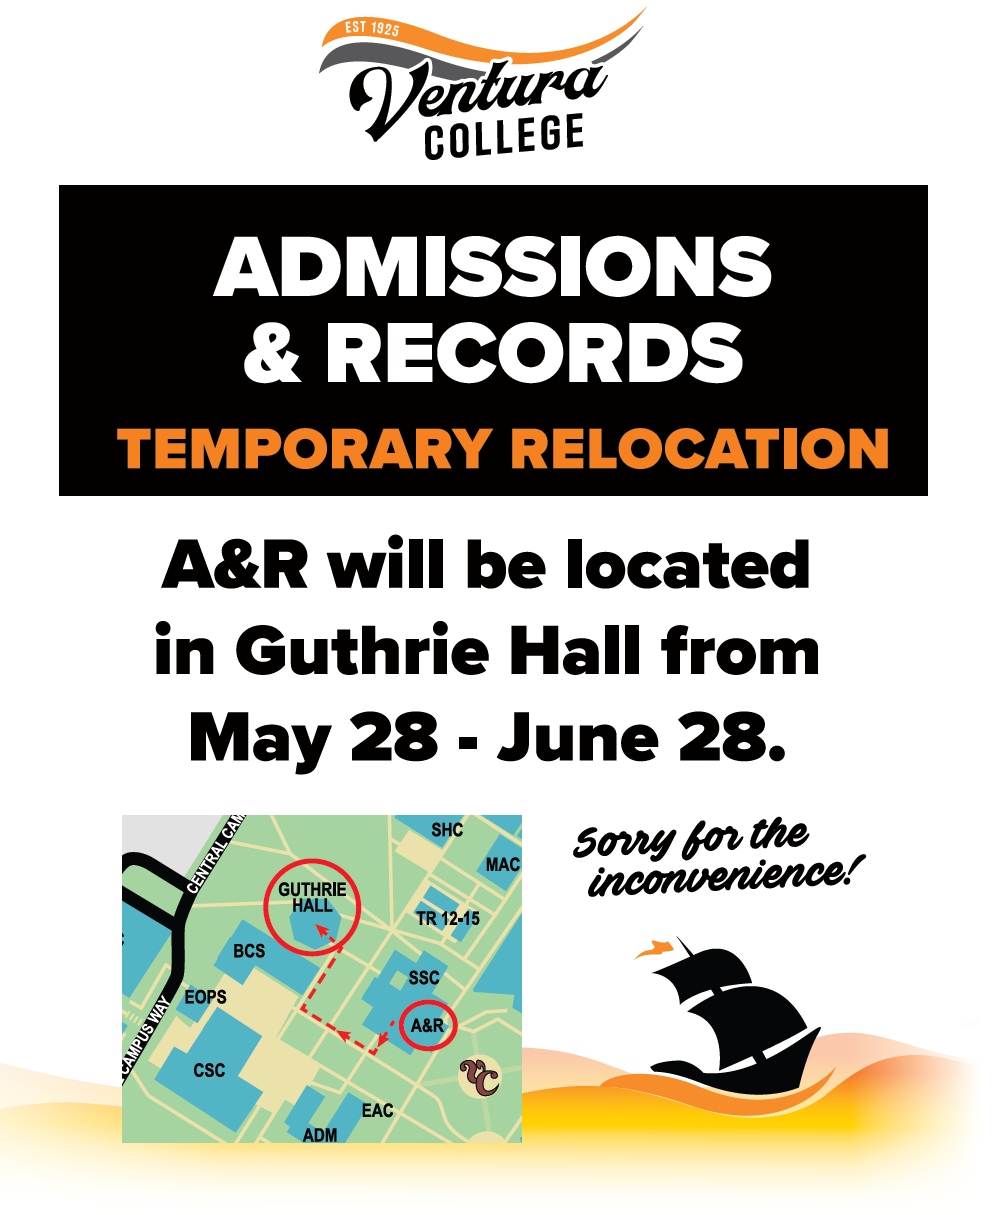 Admissions & Records will be located in Guthrie Hall